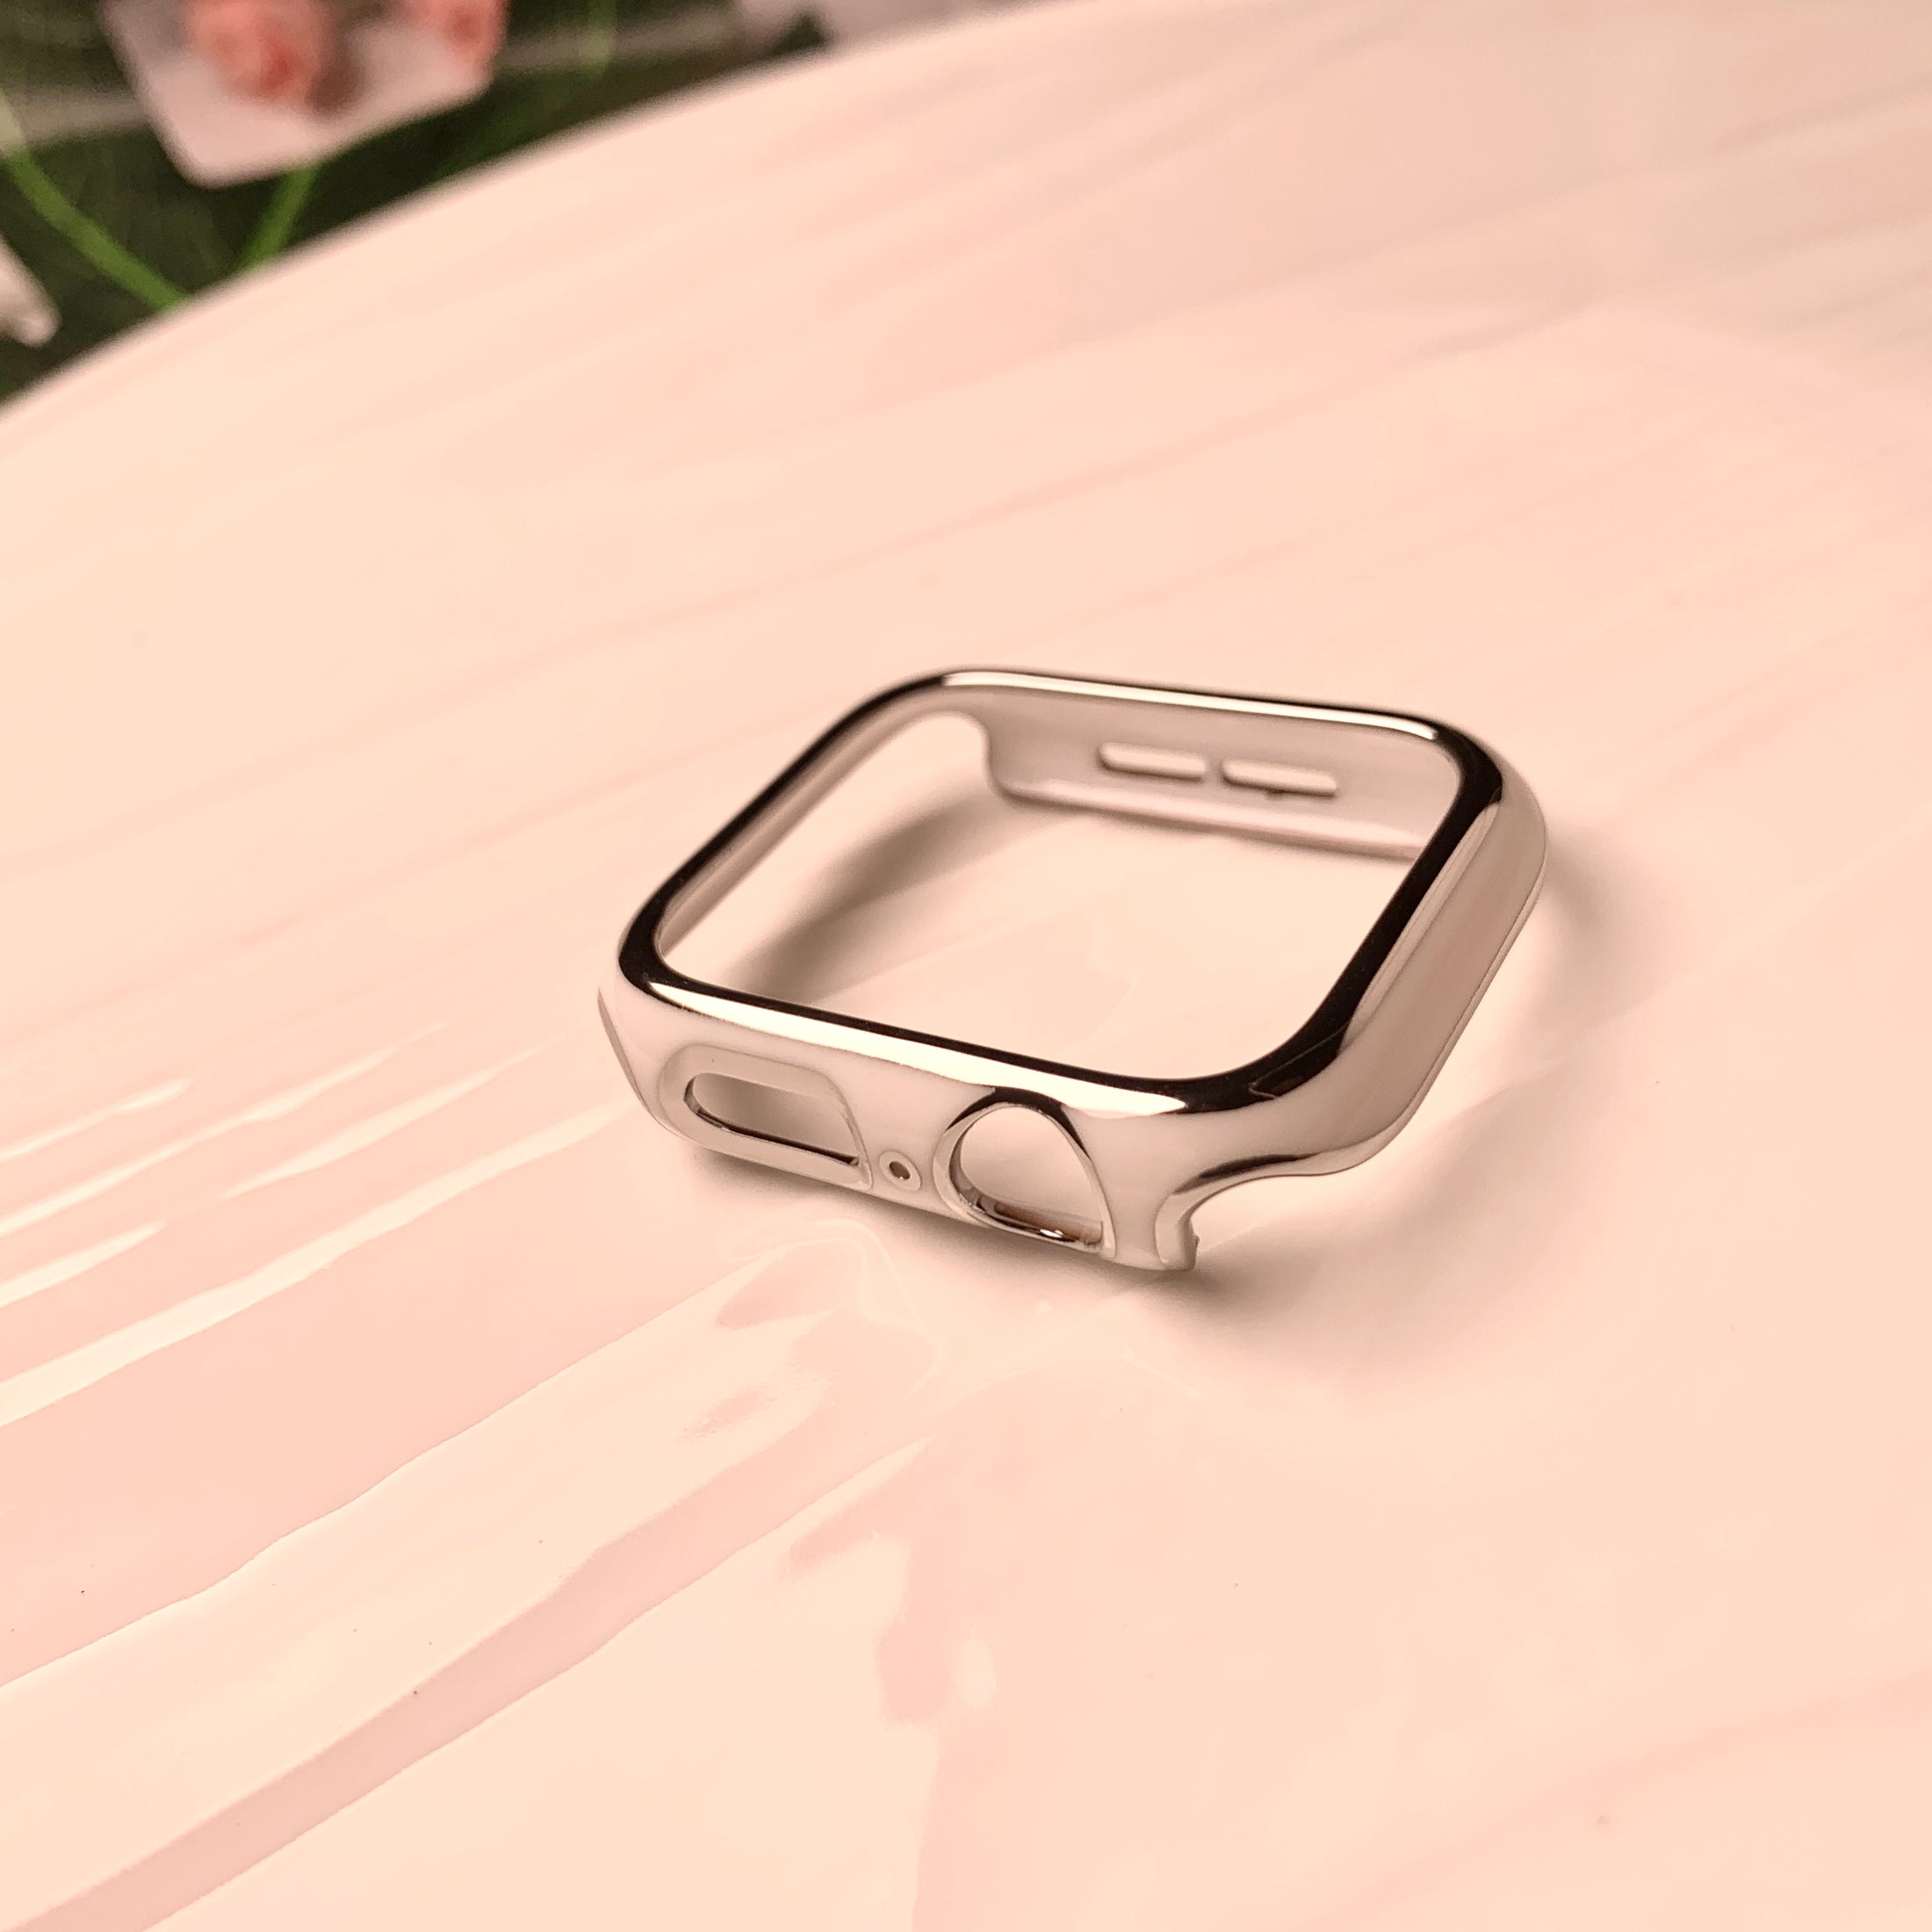 Dual Colour Electroplate Apple Watch Casing